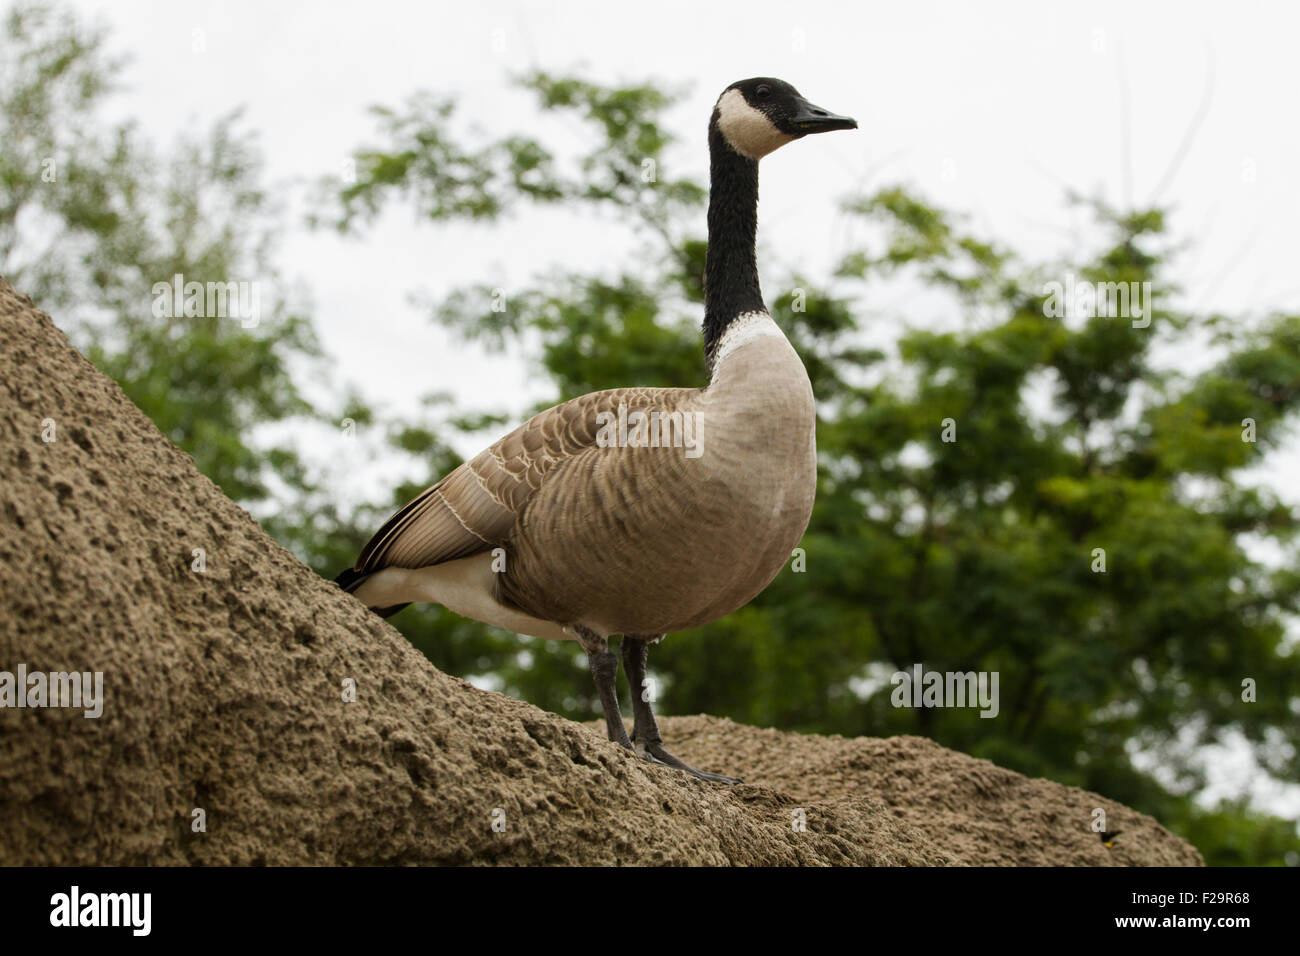 Canadian goose standing on rock Stock Photo